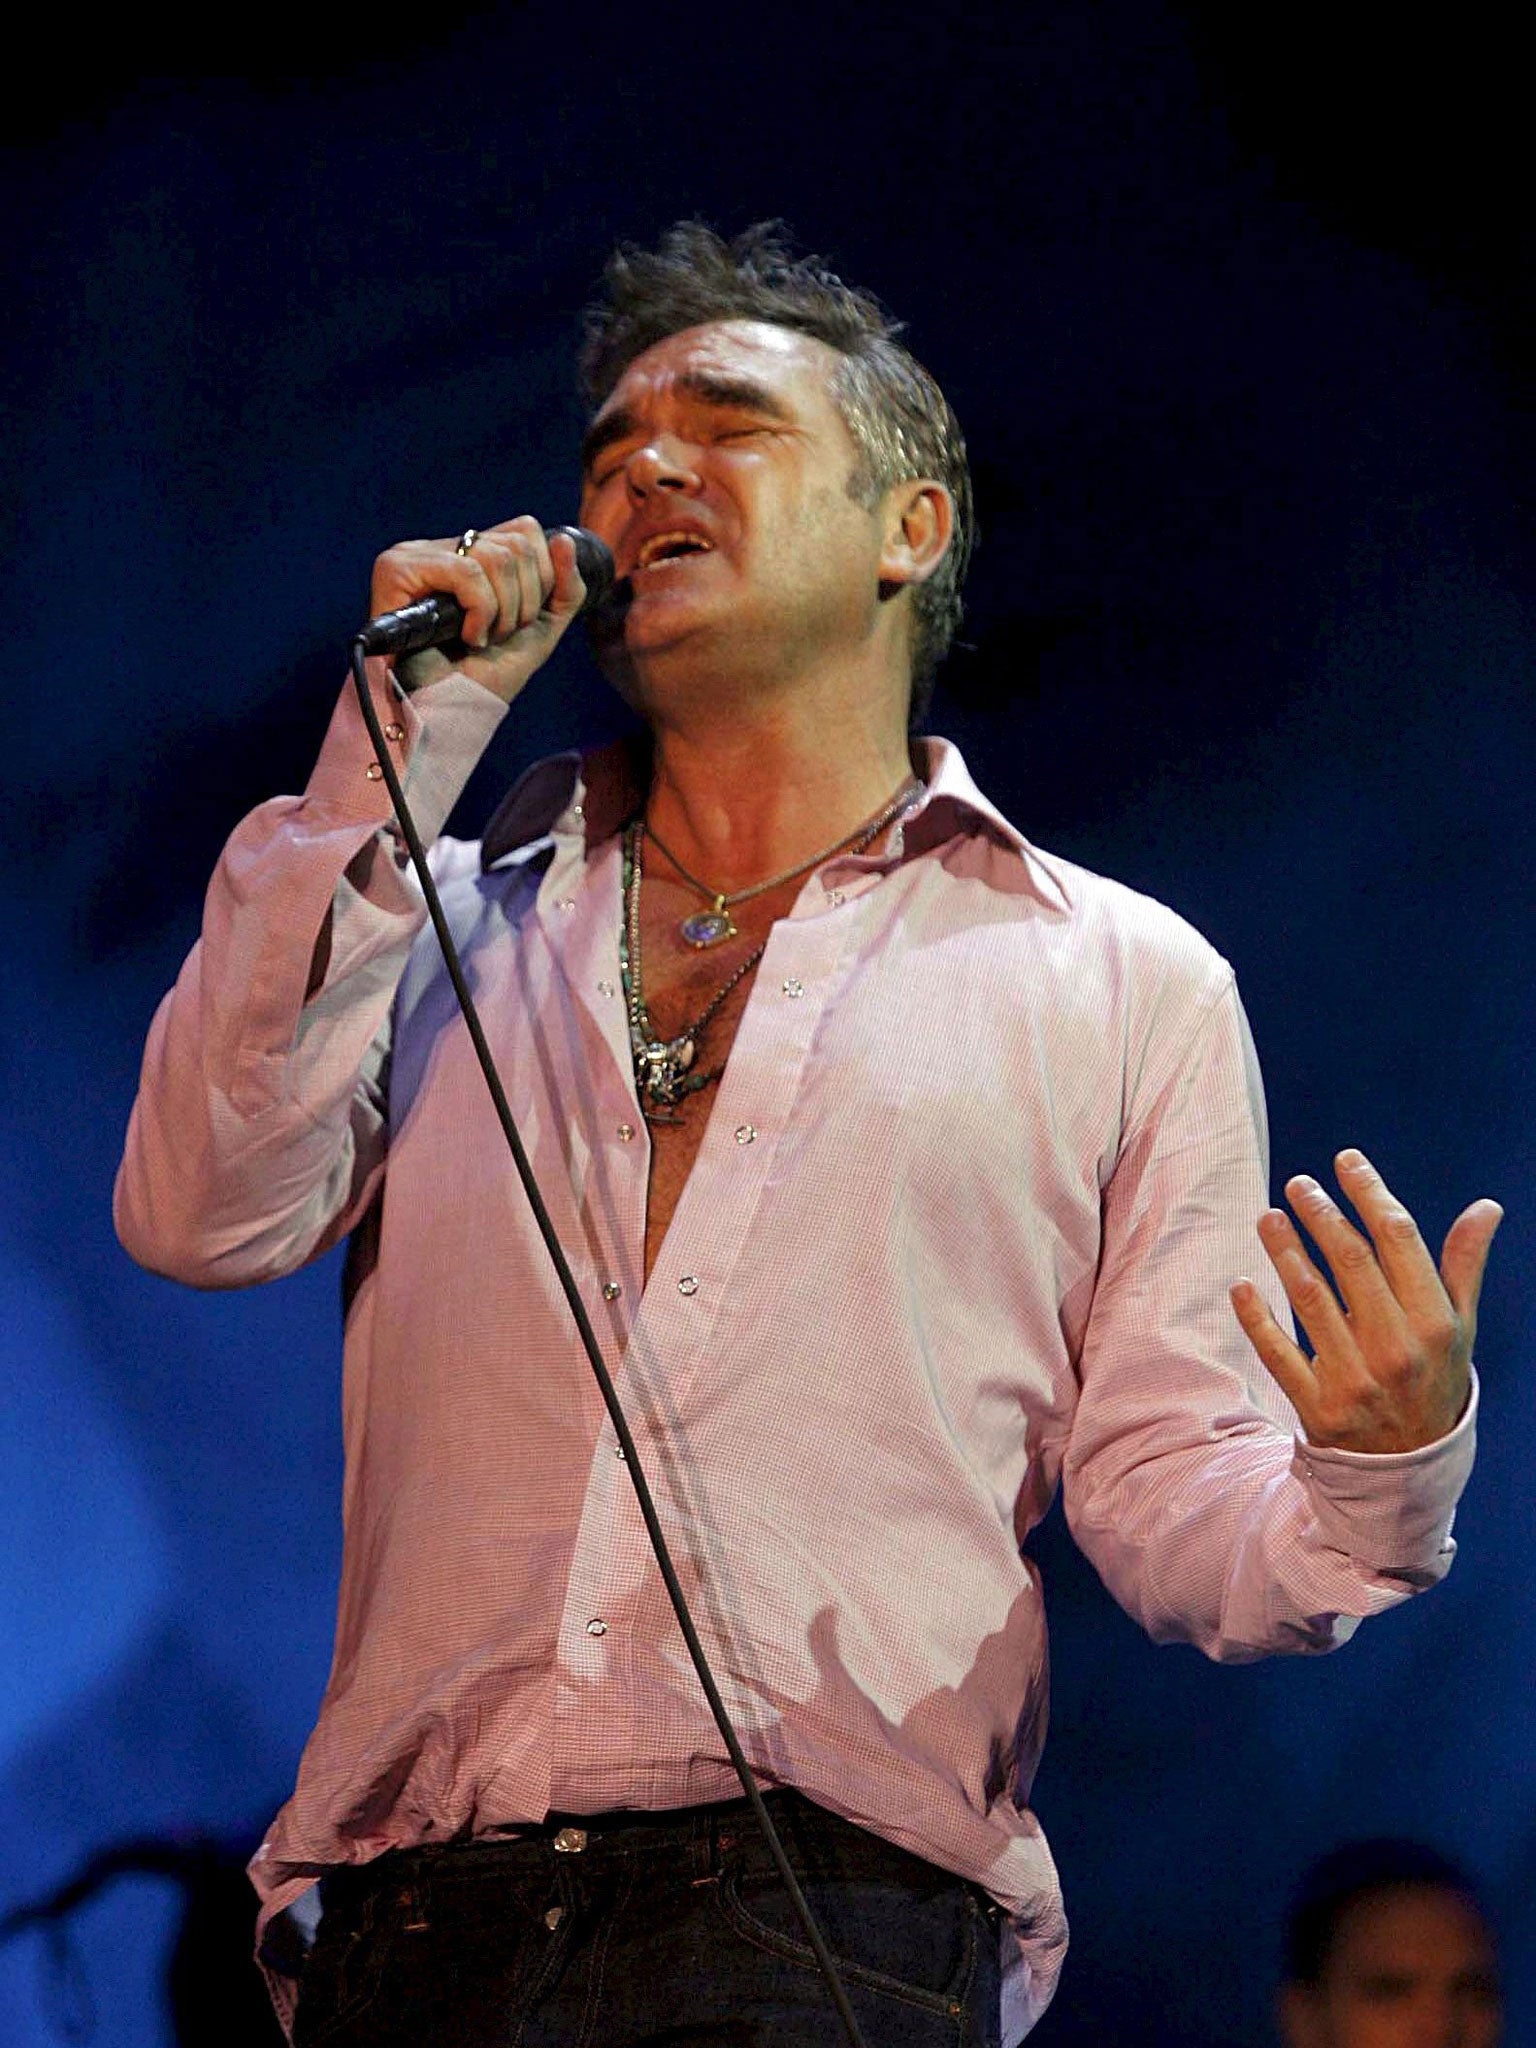 Out of this world: Morrissey